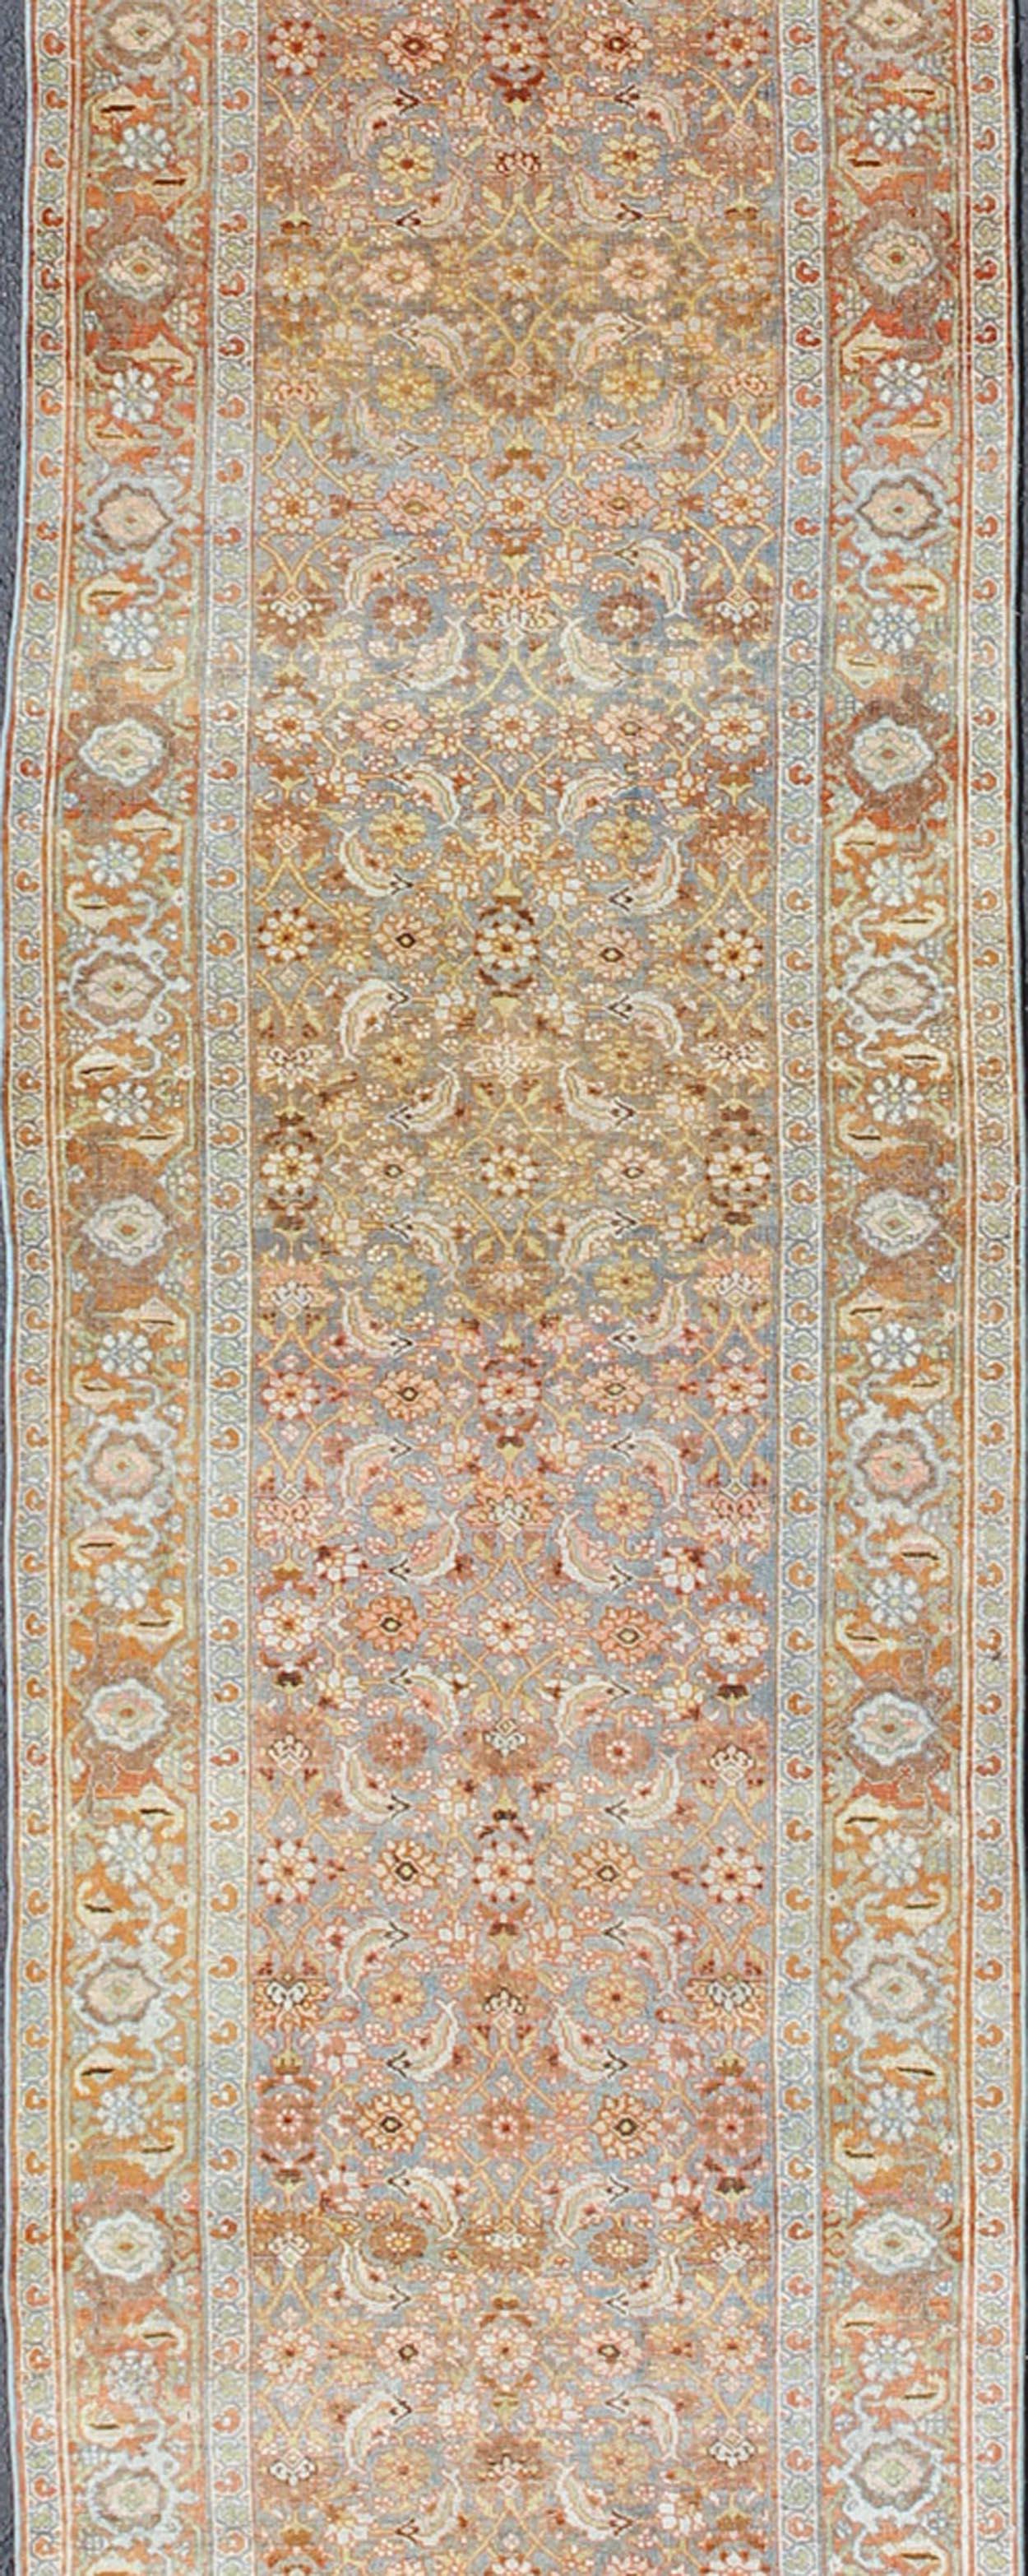 Antique Persian Bidjar Rug with Blossoming Floral Design in Light Blue and Red For Sale 3